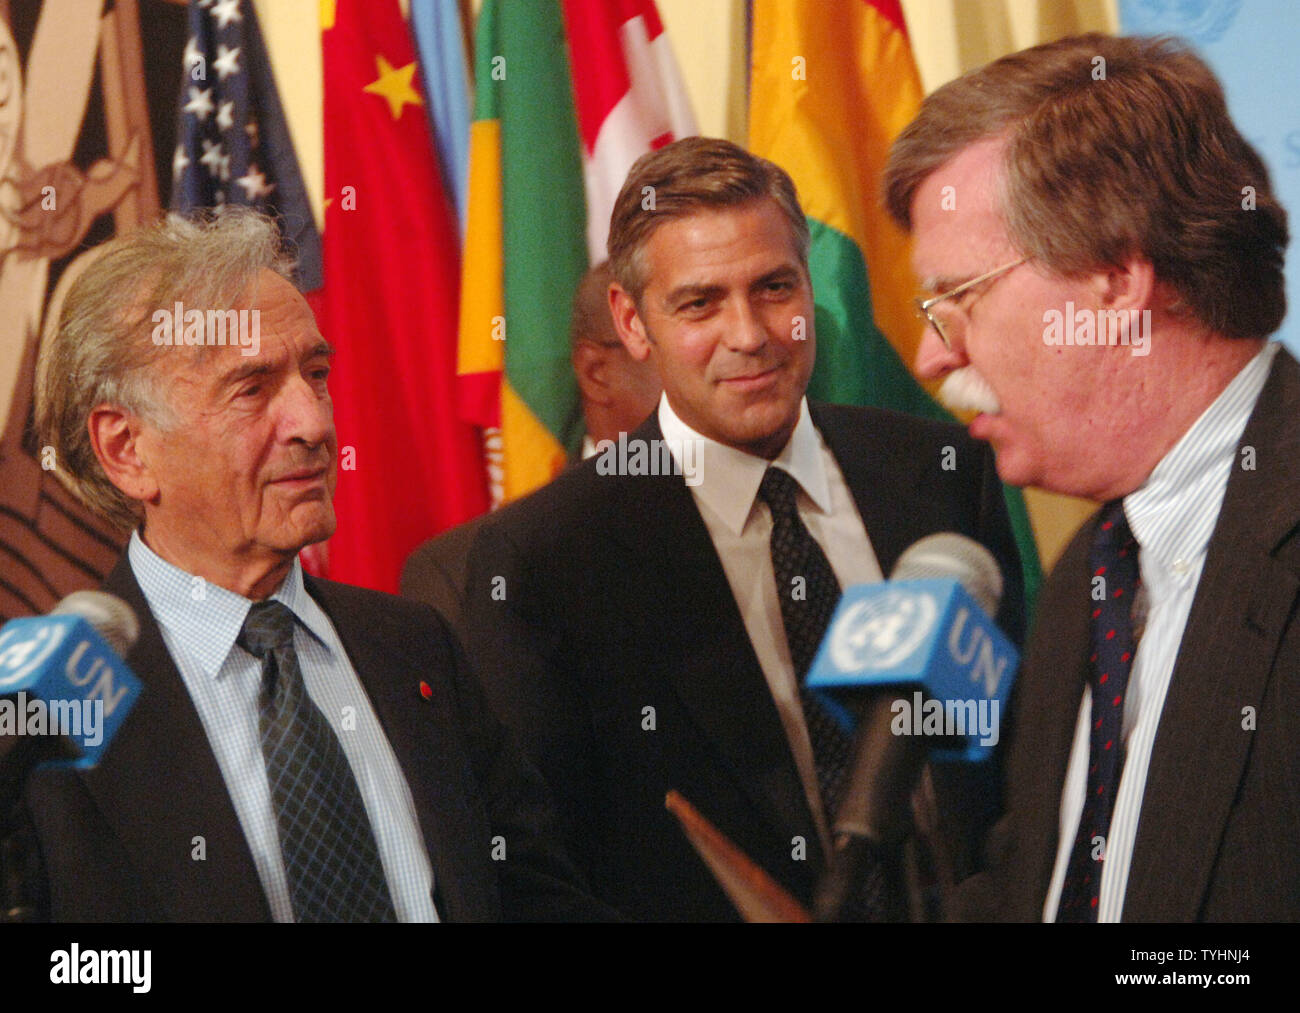 Nobel Peace Prize winner Dr. Elie Wiesel ,actor/producer George Clooney and US Ambassador to UN John Bolton (left to right) meet the UN media after a 'Arria' style meeting of the United Nations Security Council members on the subject of Dafur, Sudan on September 14, 2006 in New York. The meeting was called for by the U.S. Mission to the UN and the Elie Wiesel Foundation.   (UPI Photo/Ezio Petersen) Stock Photo